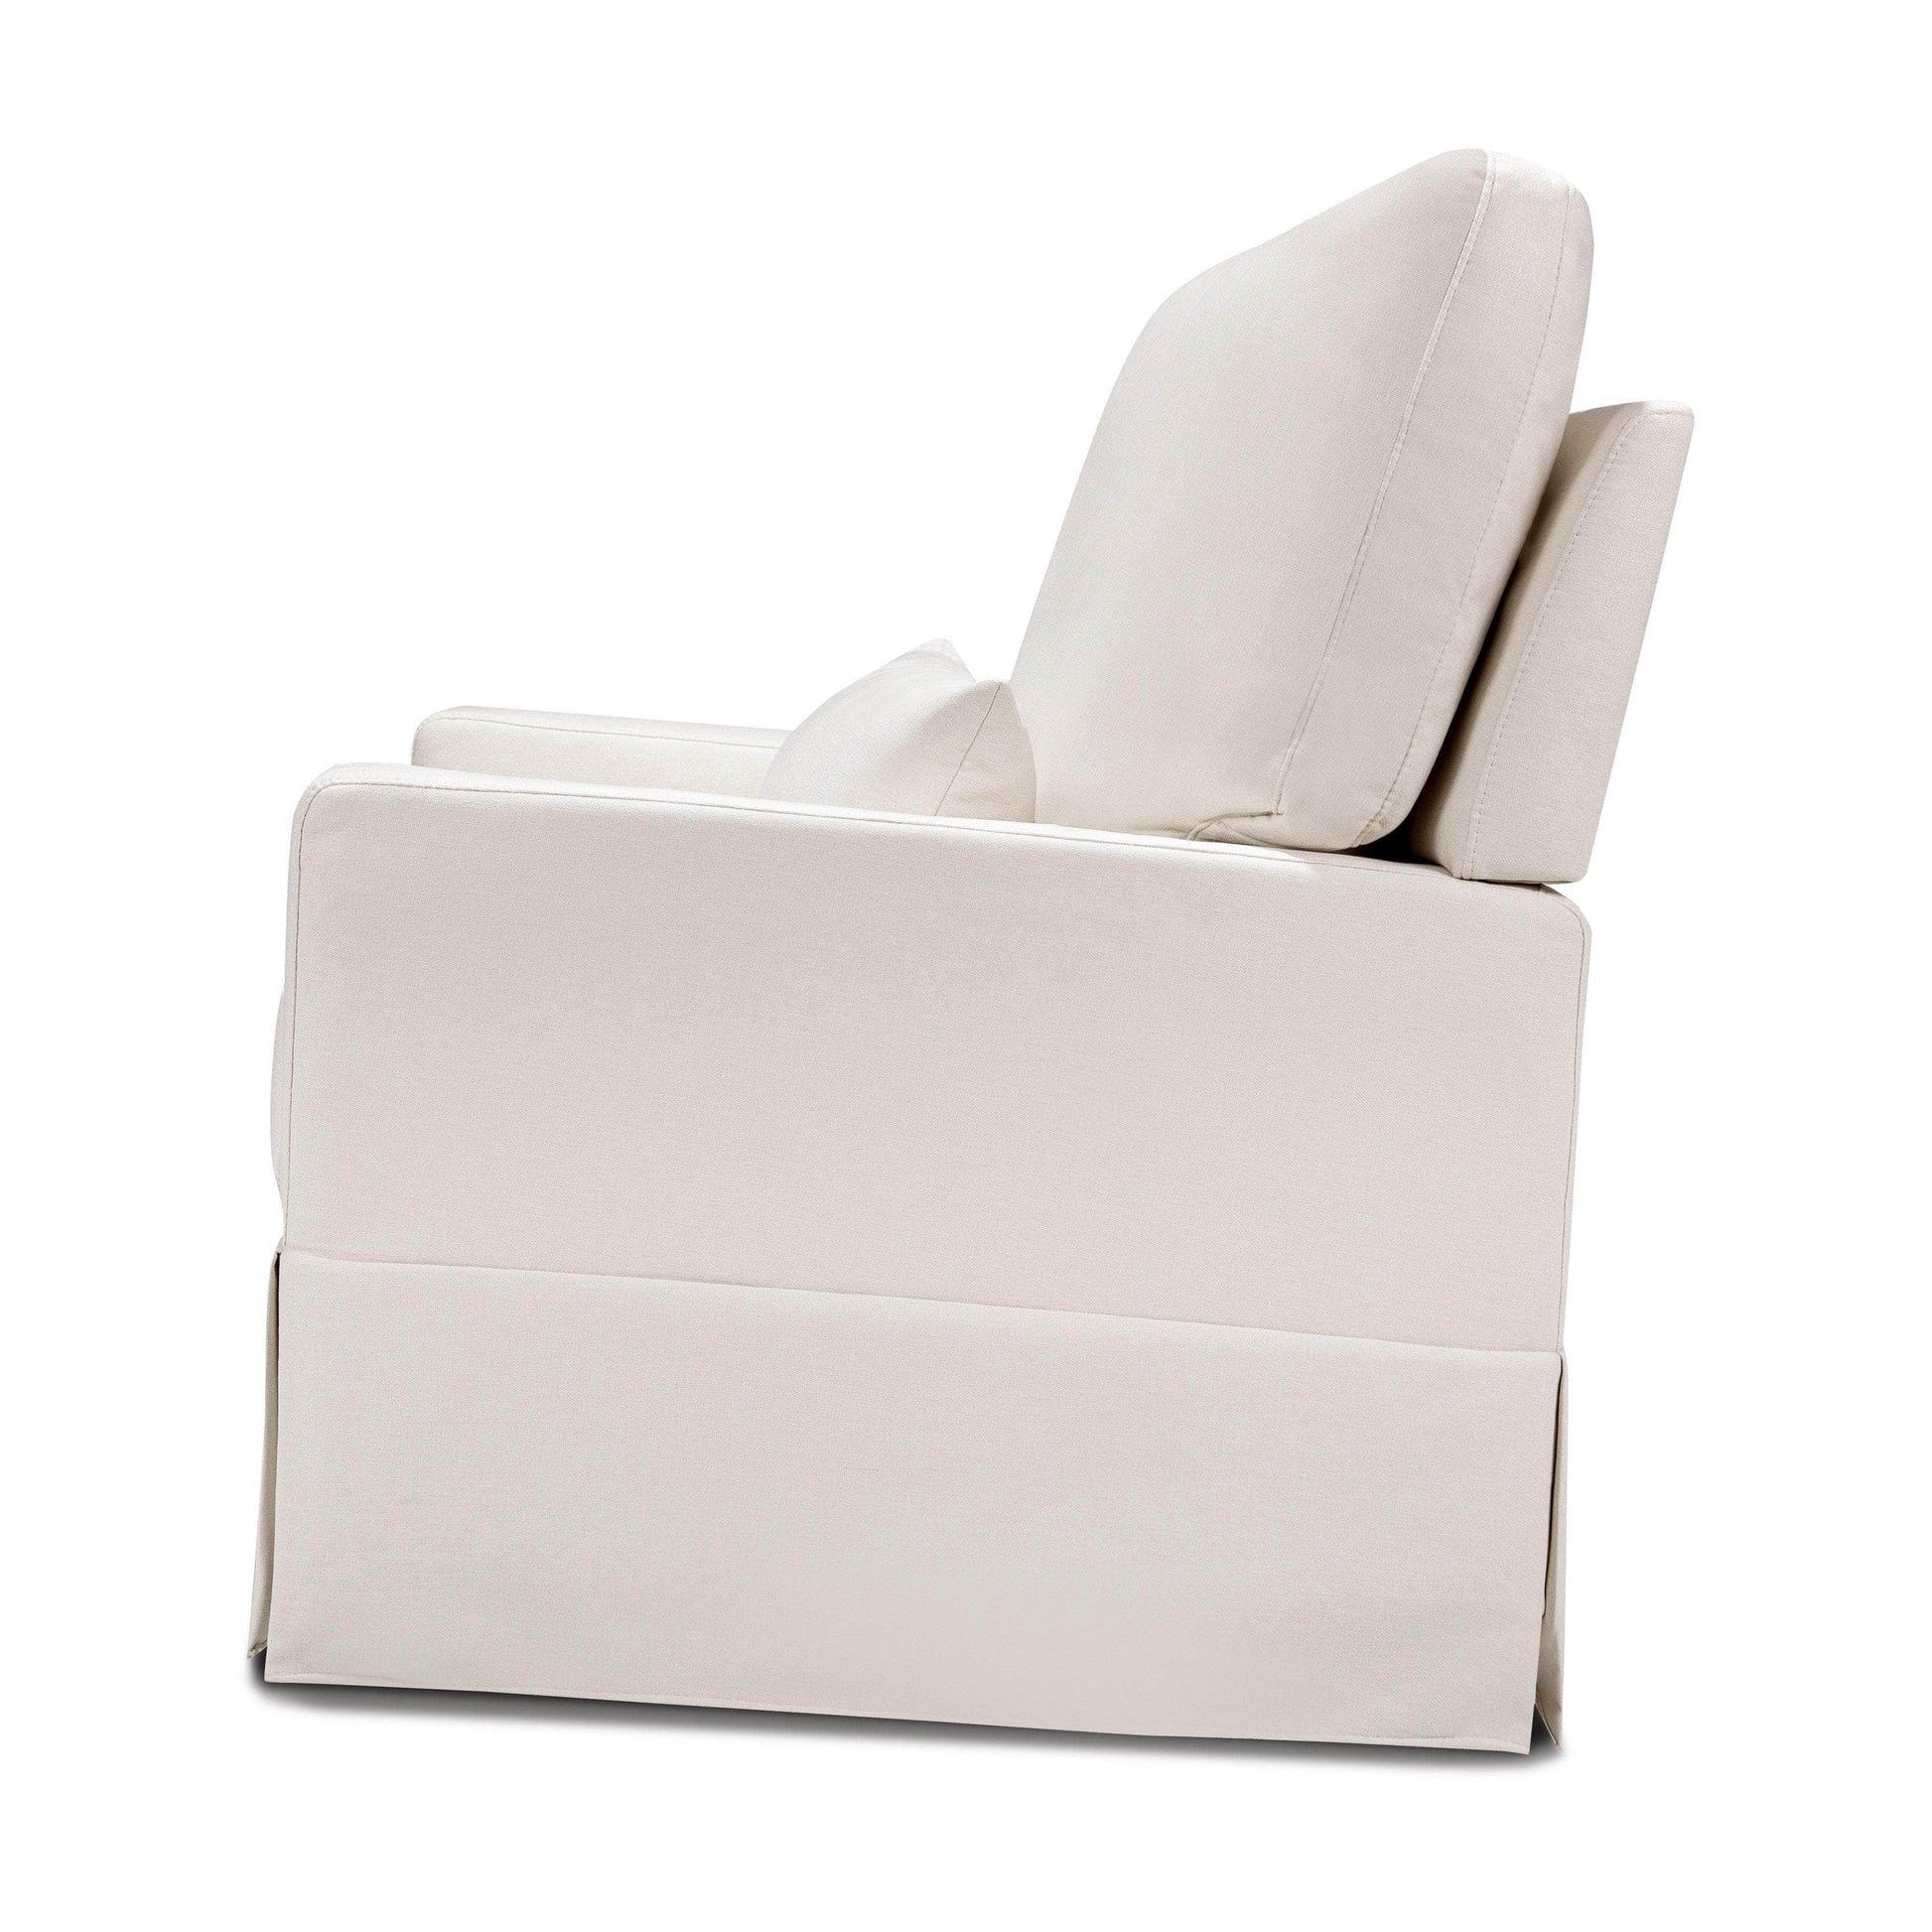 M21797PCMEW,Crawford Chair and a Half Pillowback Swivel Glider in Performance Cream Eco Weave